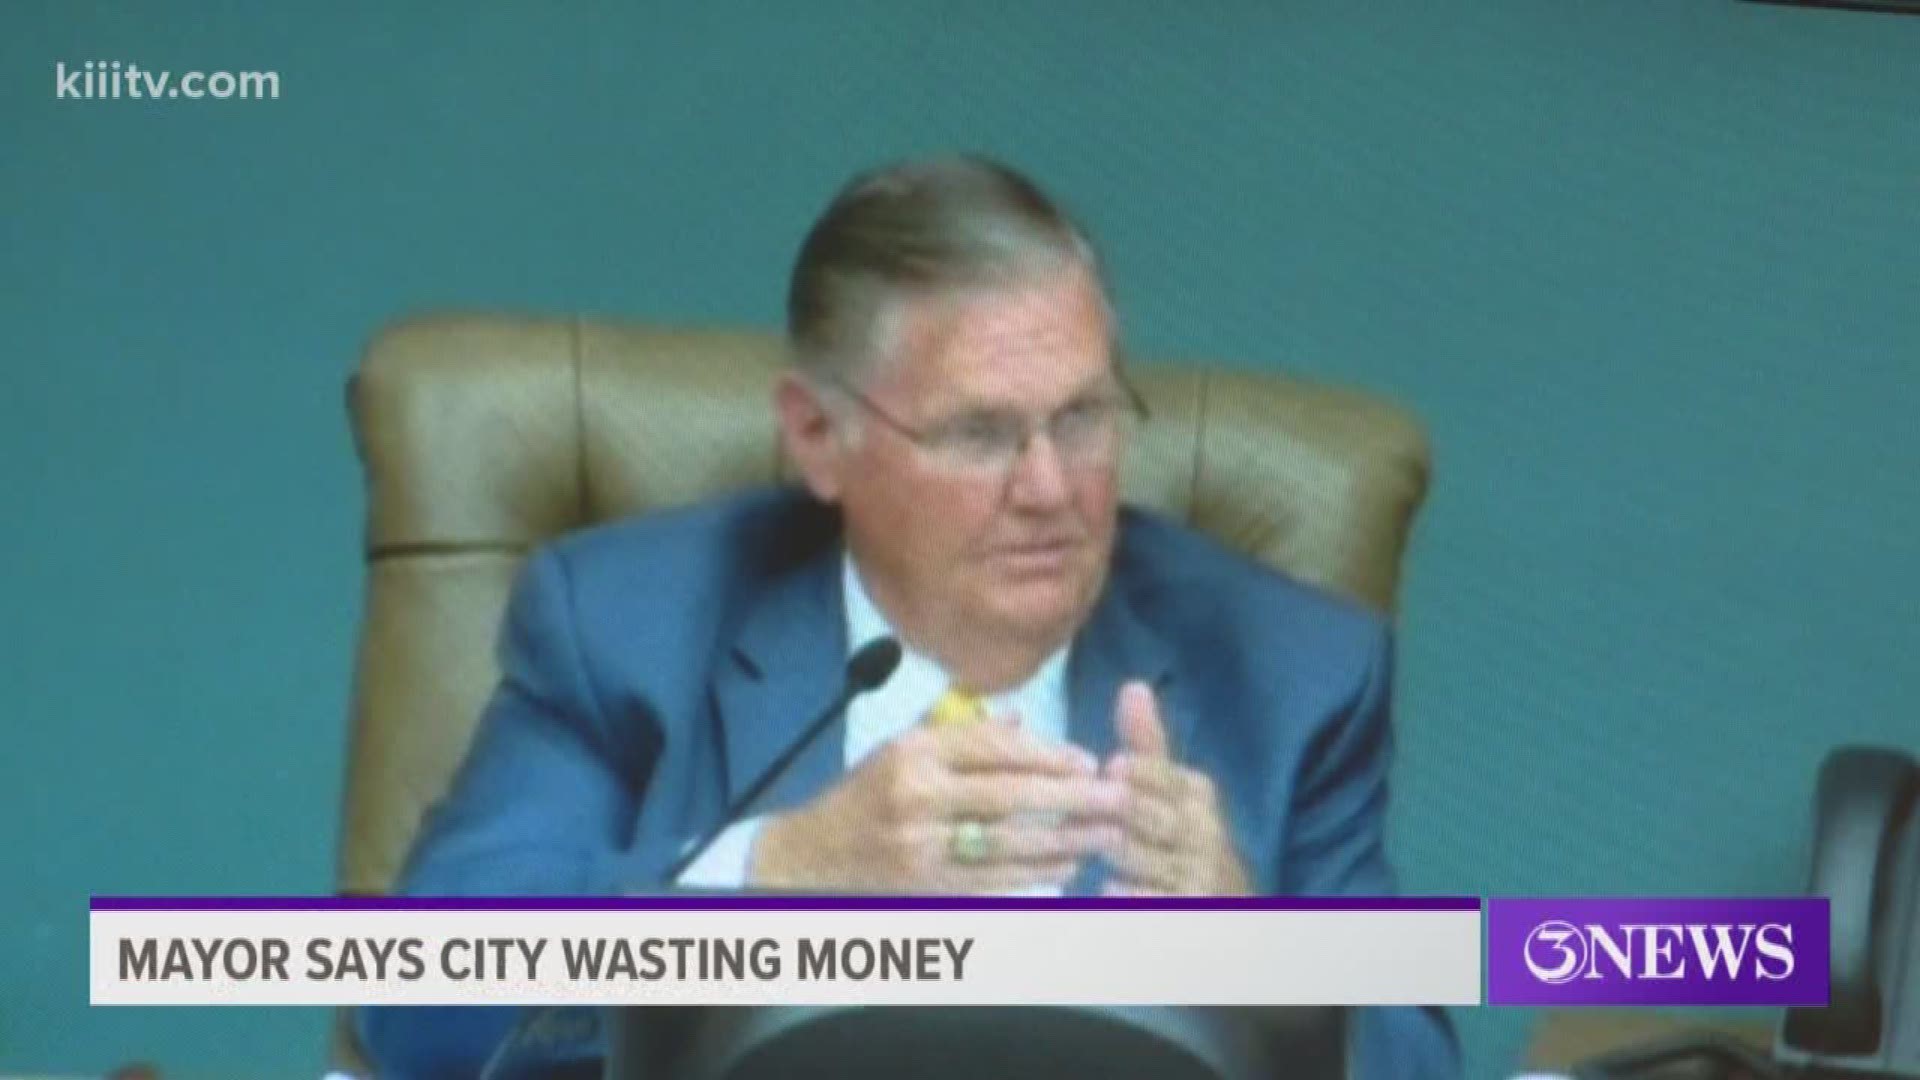 Mayor Joe McComb said the City is wasting money when it comes to cleaning up and maintaining more than 400 abandoned or vacant houses around town.